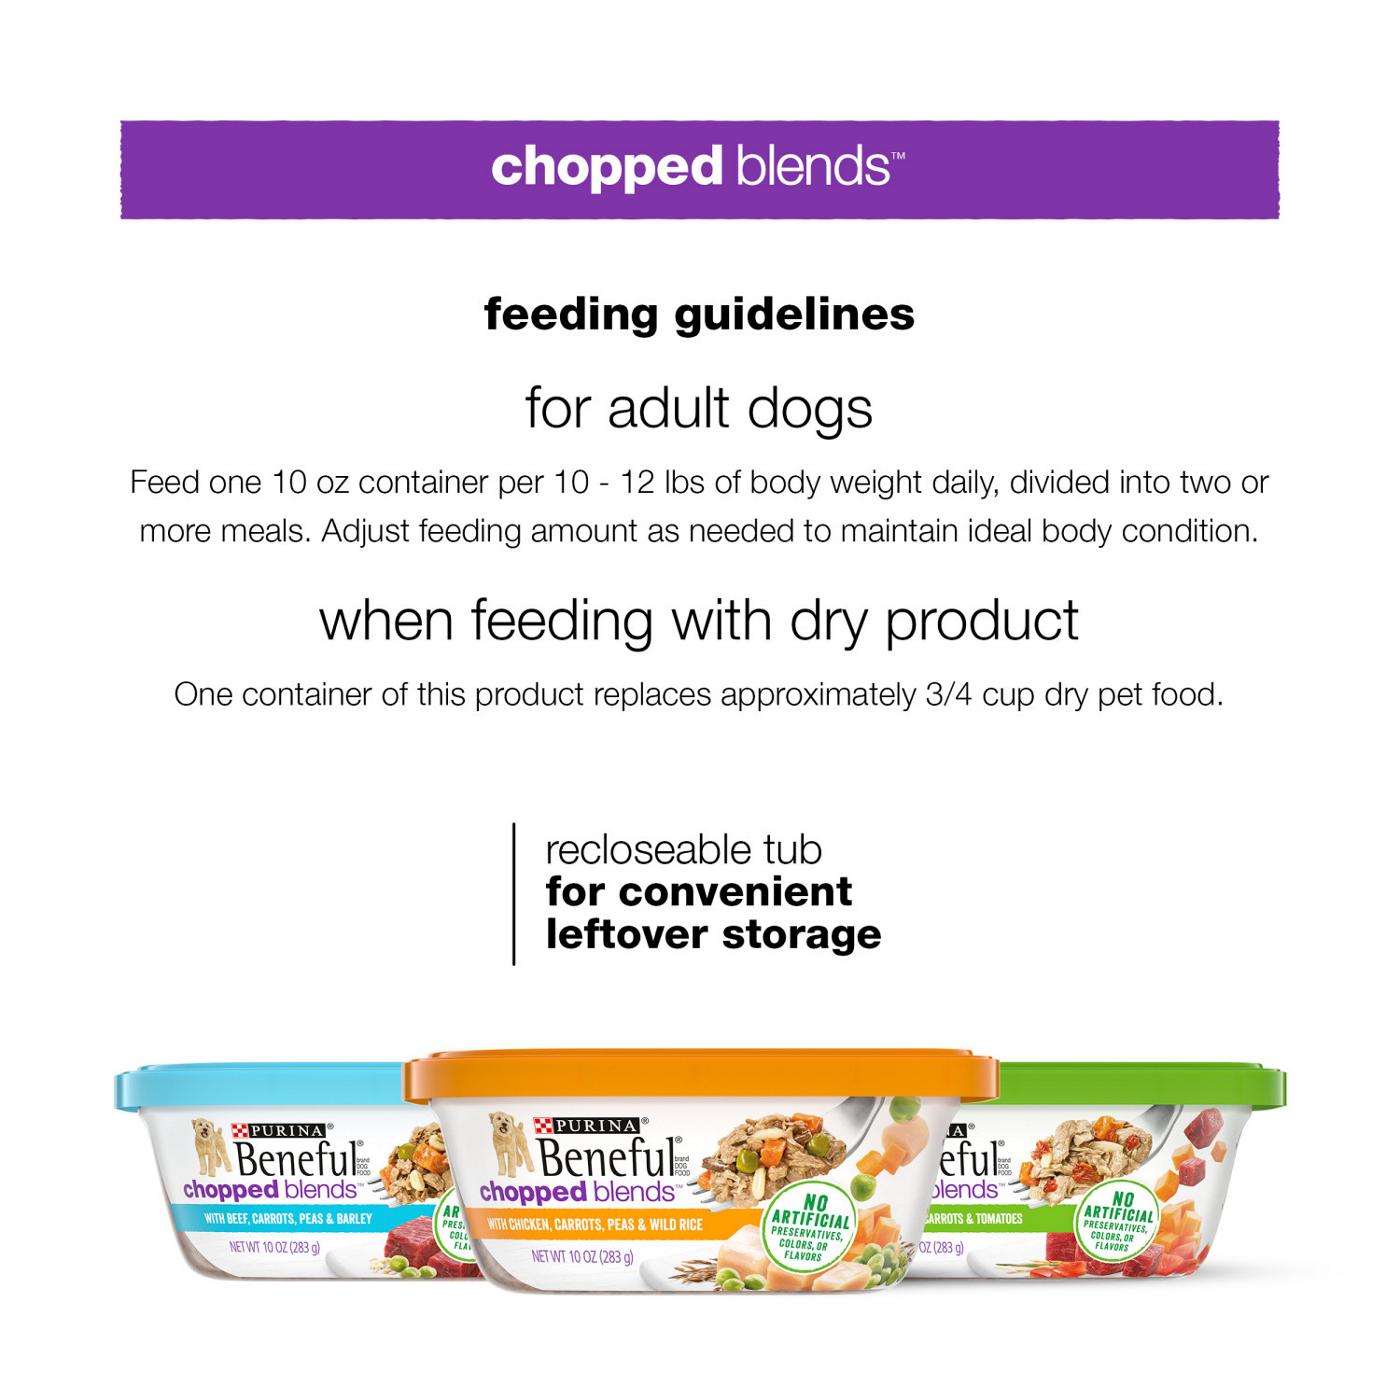 Beneful Purina Beneful High Protein Wet Dog Food Variety Pack, Chopped Blends; image 4 of 9